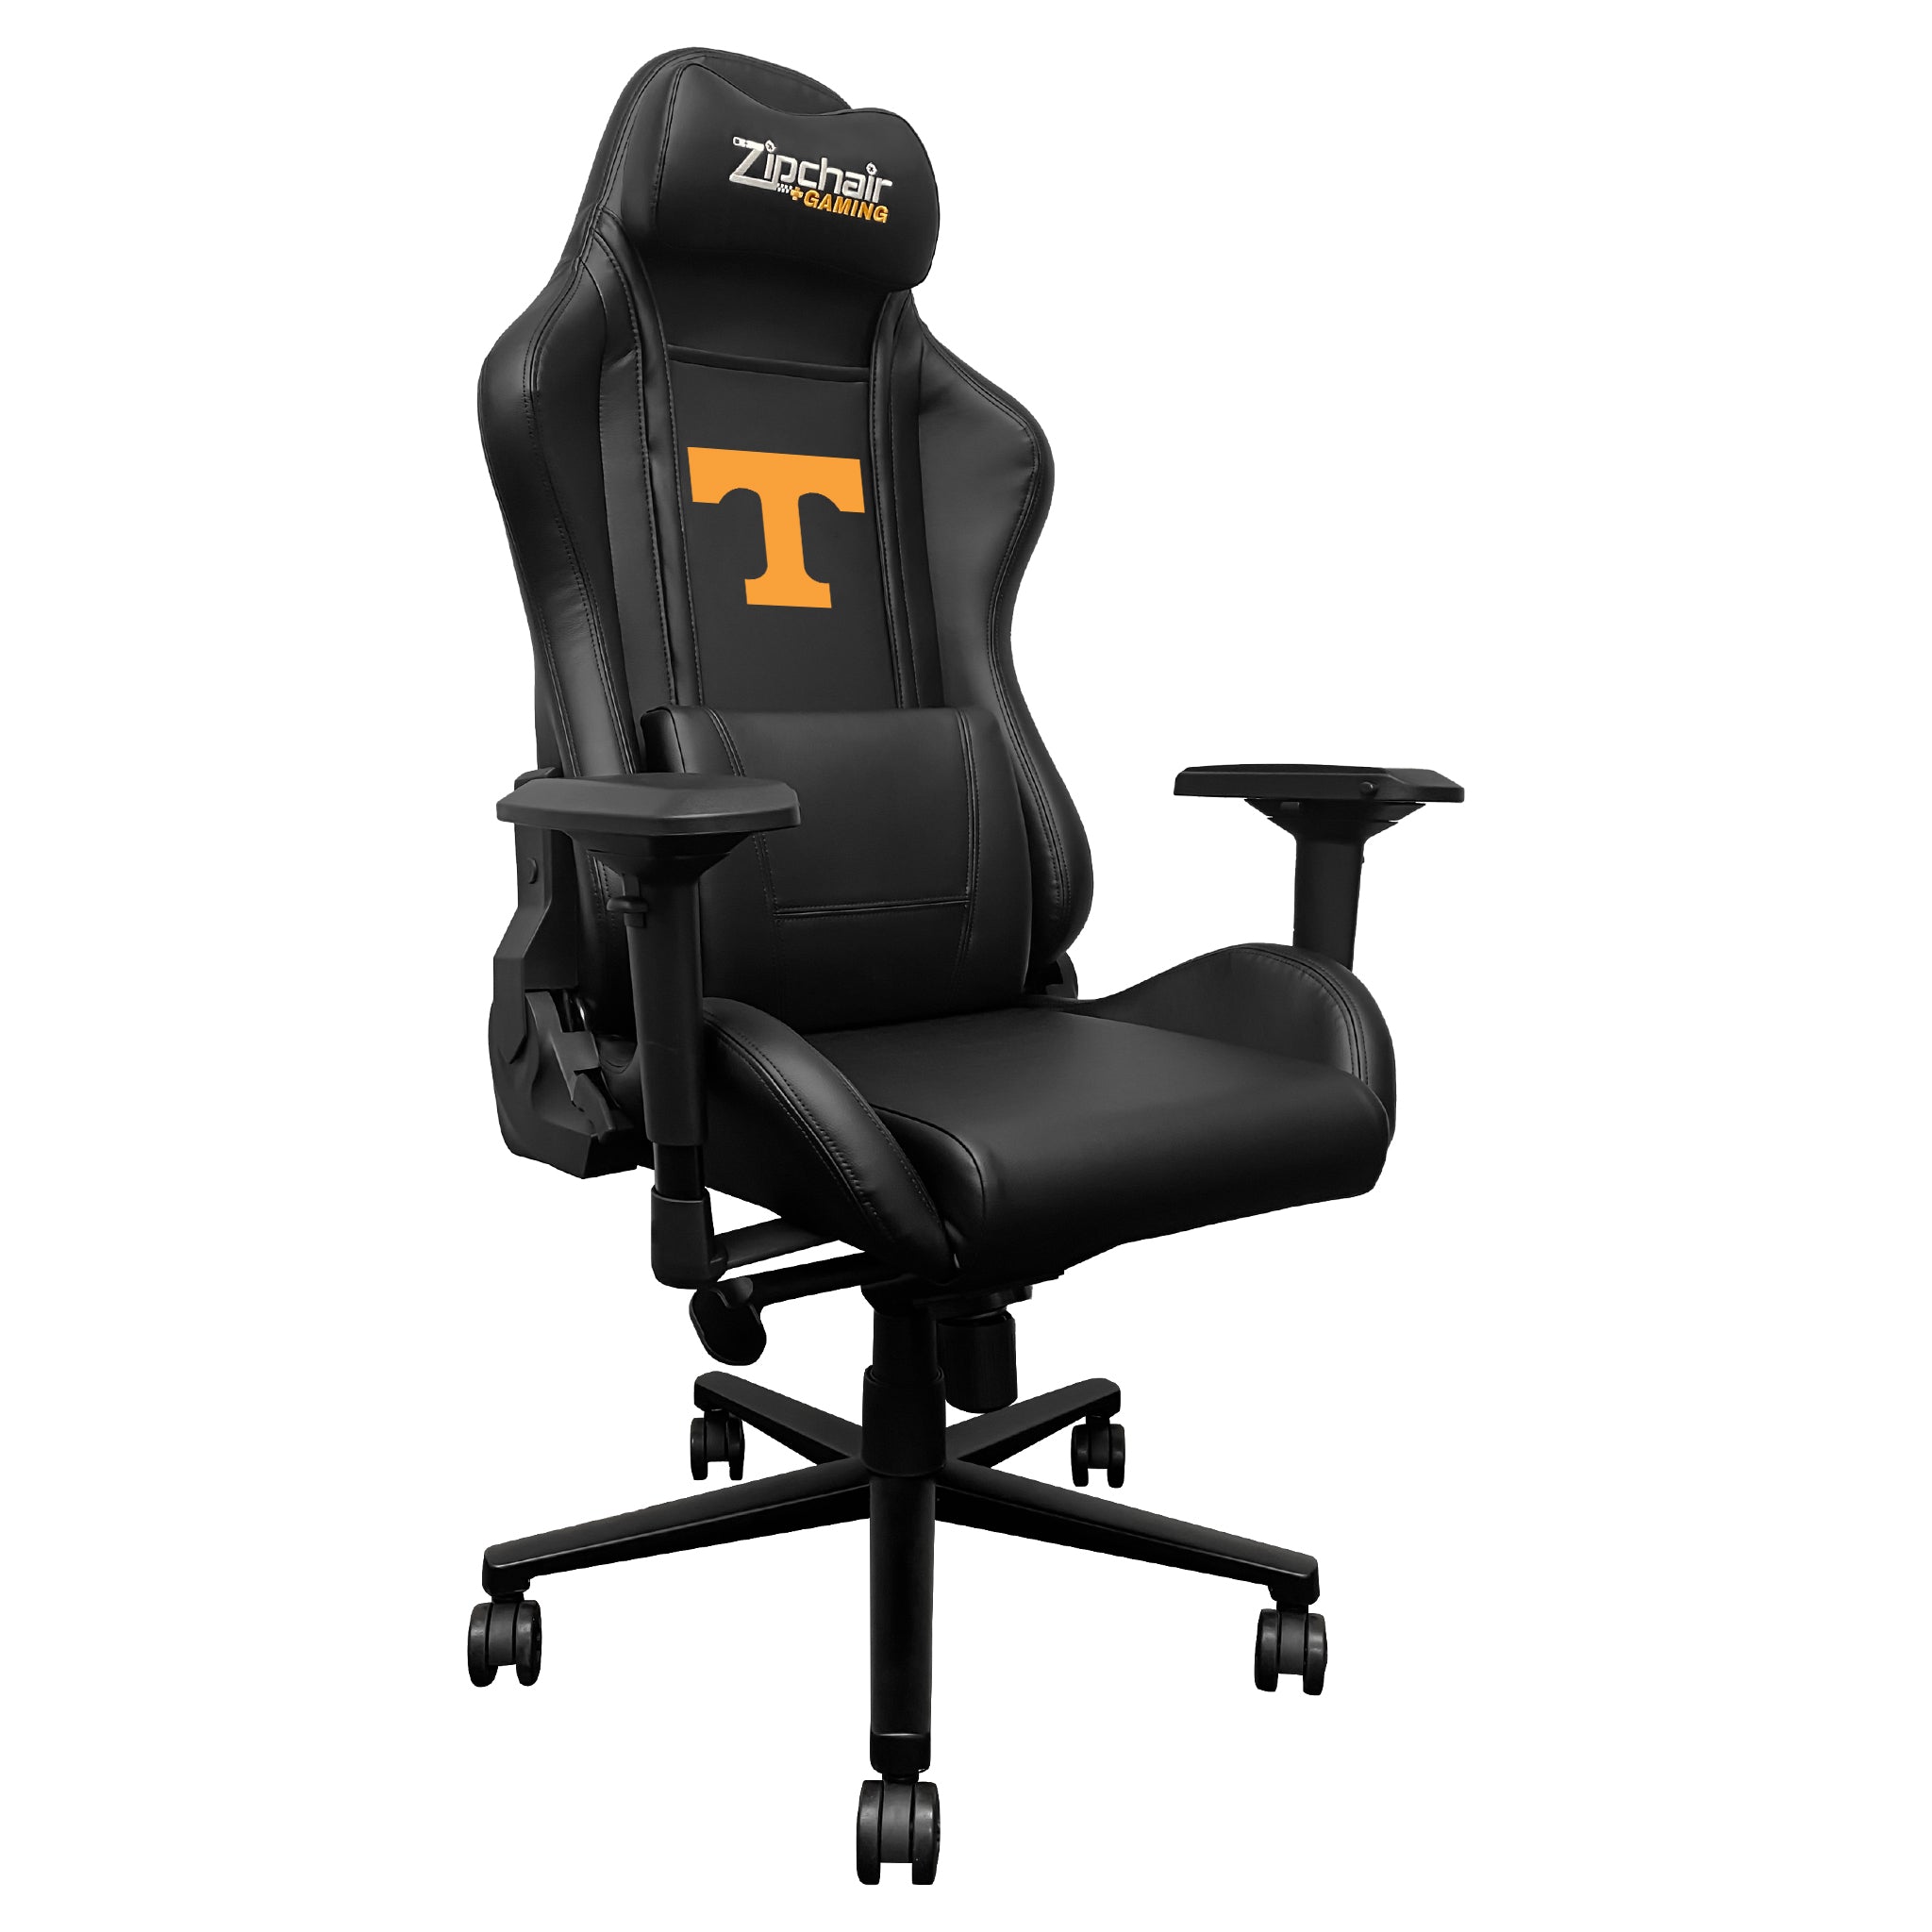 Tennessee Volunteers Xpression Gaming Chair with Tennessee Volunteers Logo